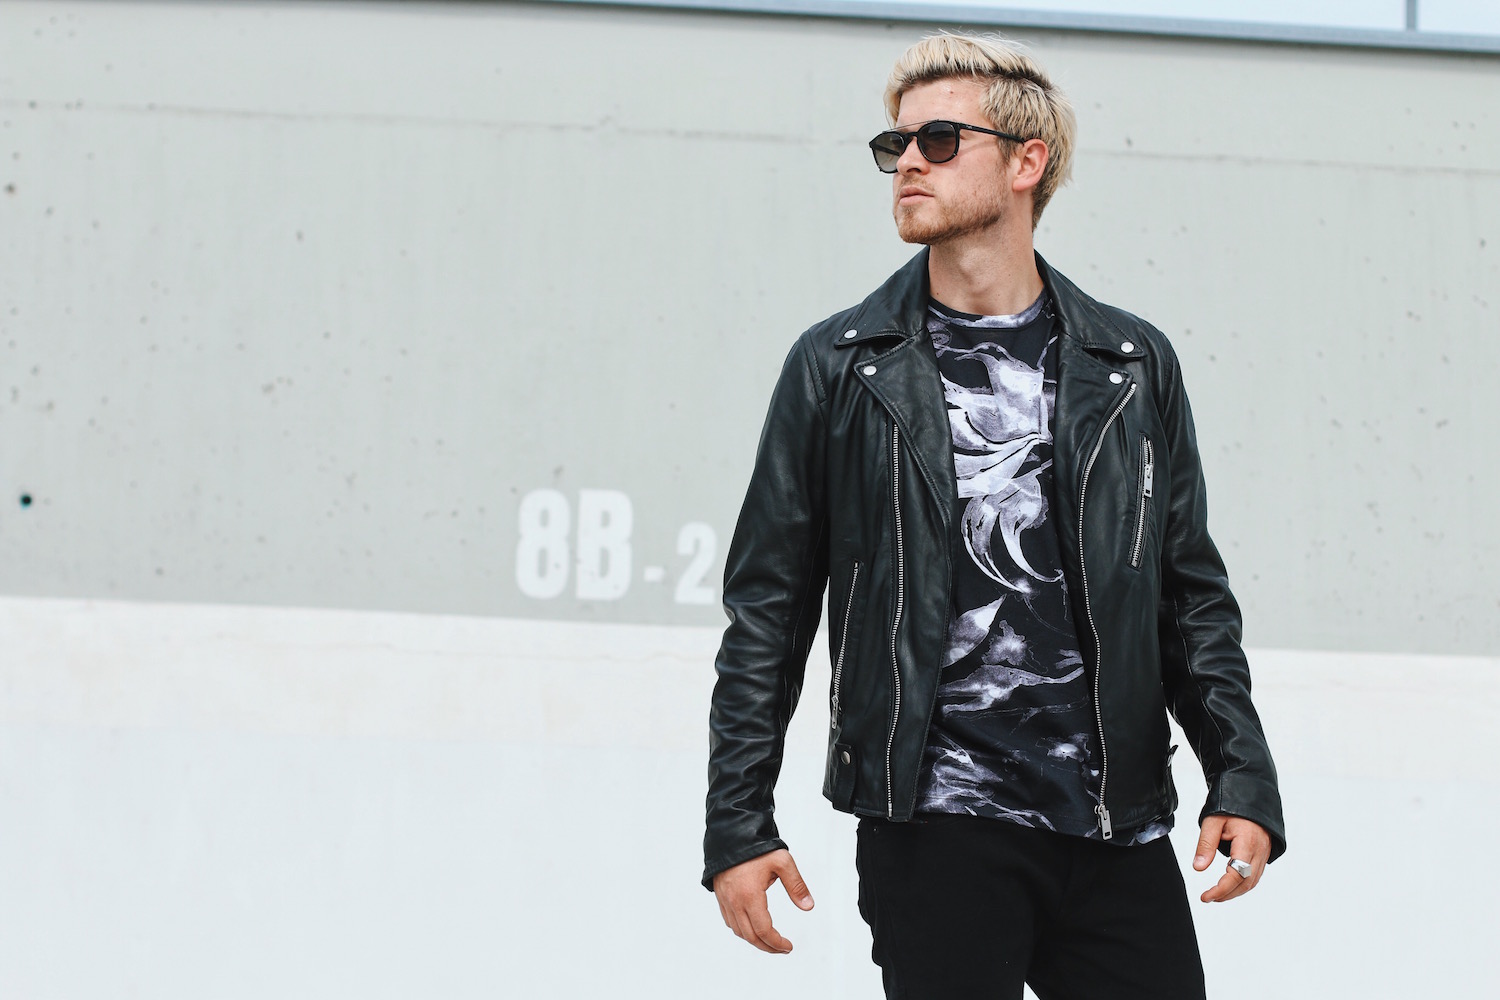 Meanwhile in Awesometown Austrian Mens Fashion Blogger_Diesel_Leather Biker Jacket_All Black_Floral Print